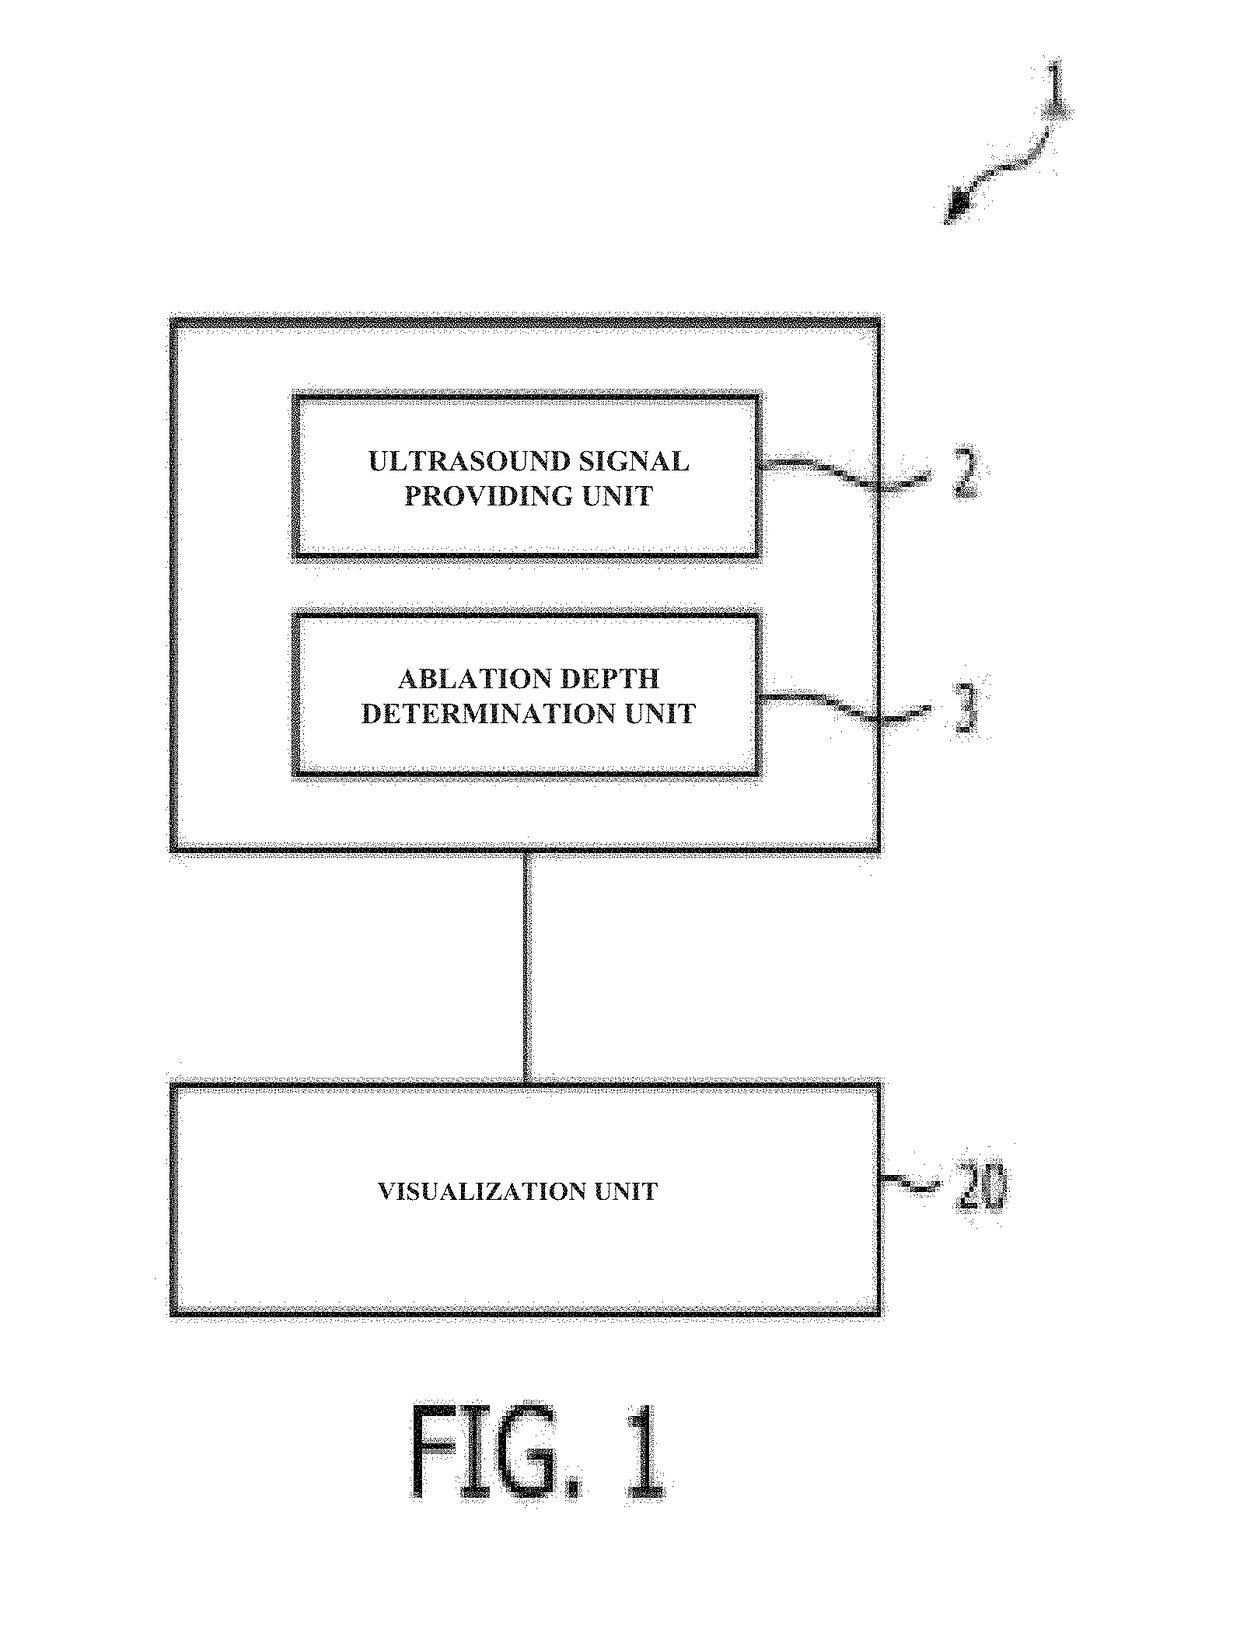 Monitoring apparatus for monitoring an ablation procedure